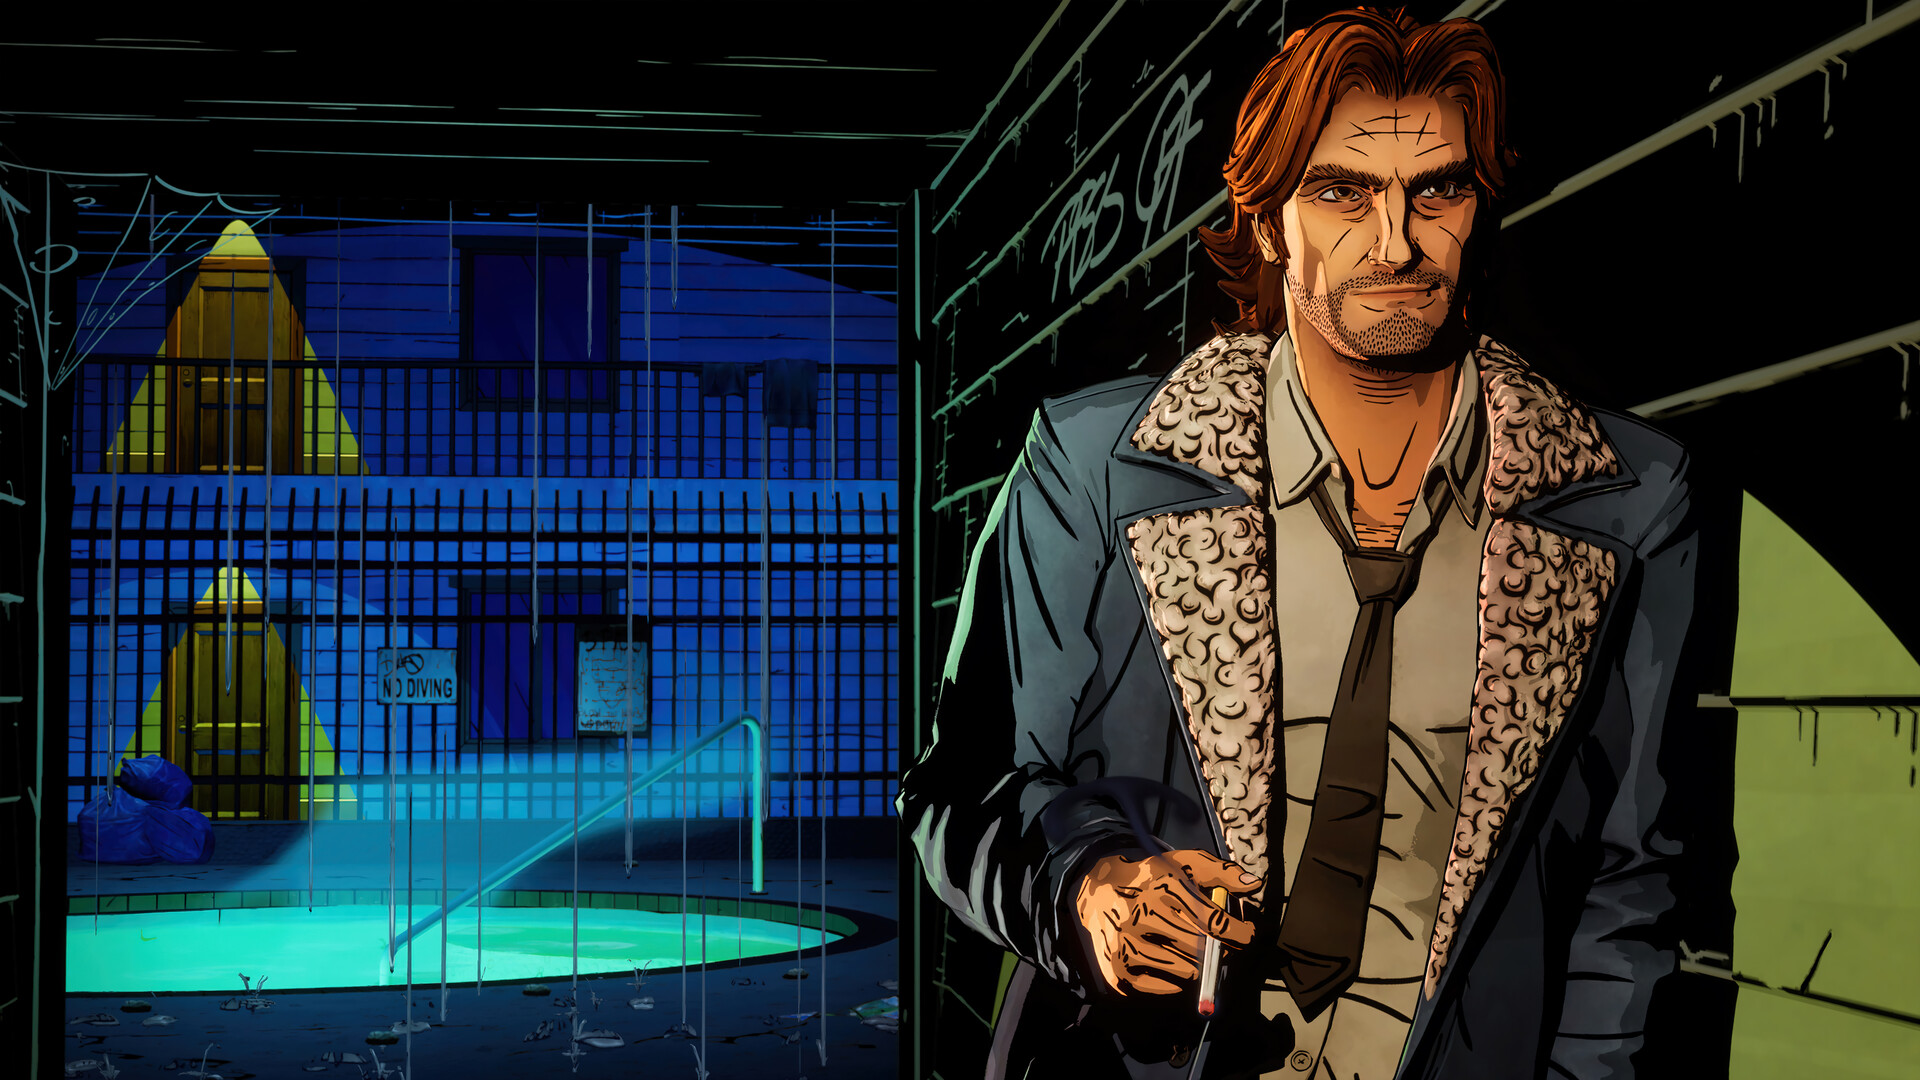 General 1920x1080 The Wolf Among Us The Big Bad Wolf Telltale Games PC gaming video games A Telltale Games Series alleyway smoking